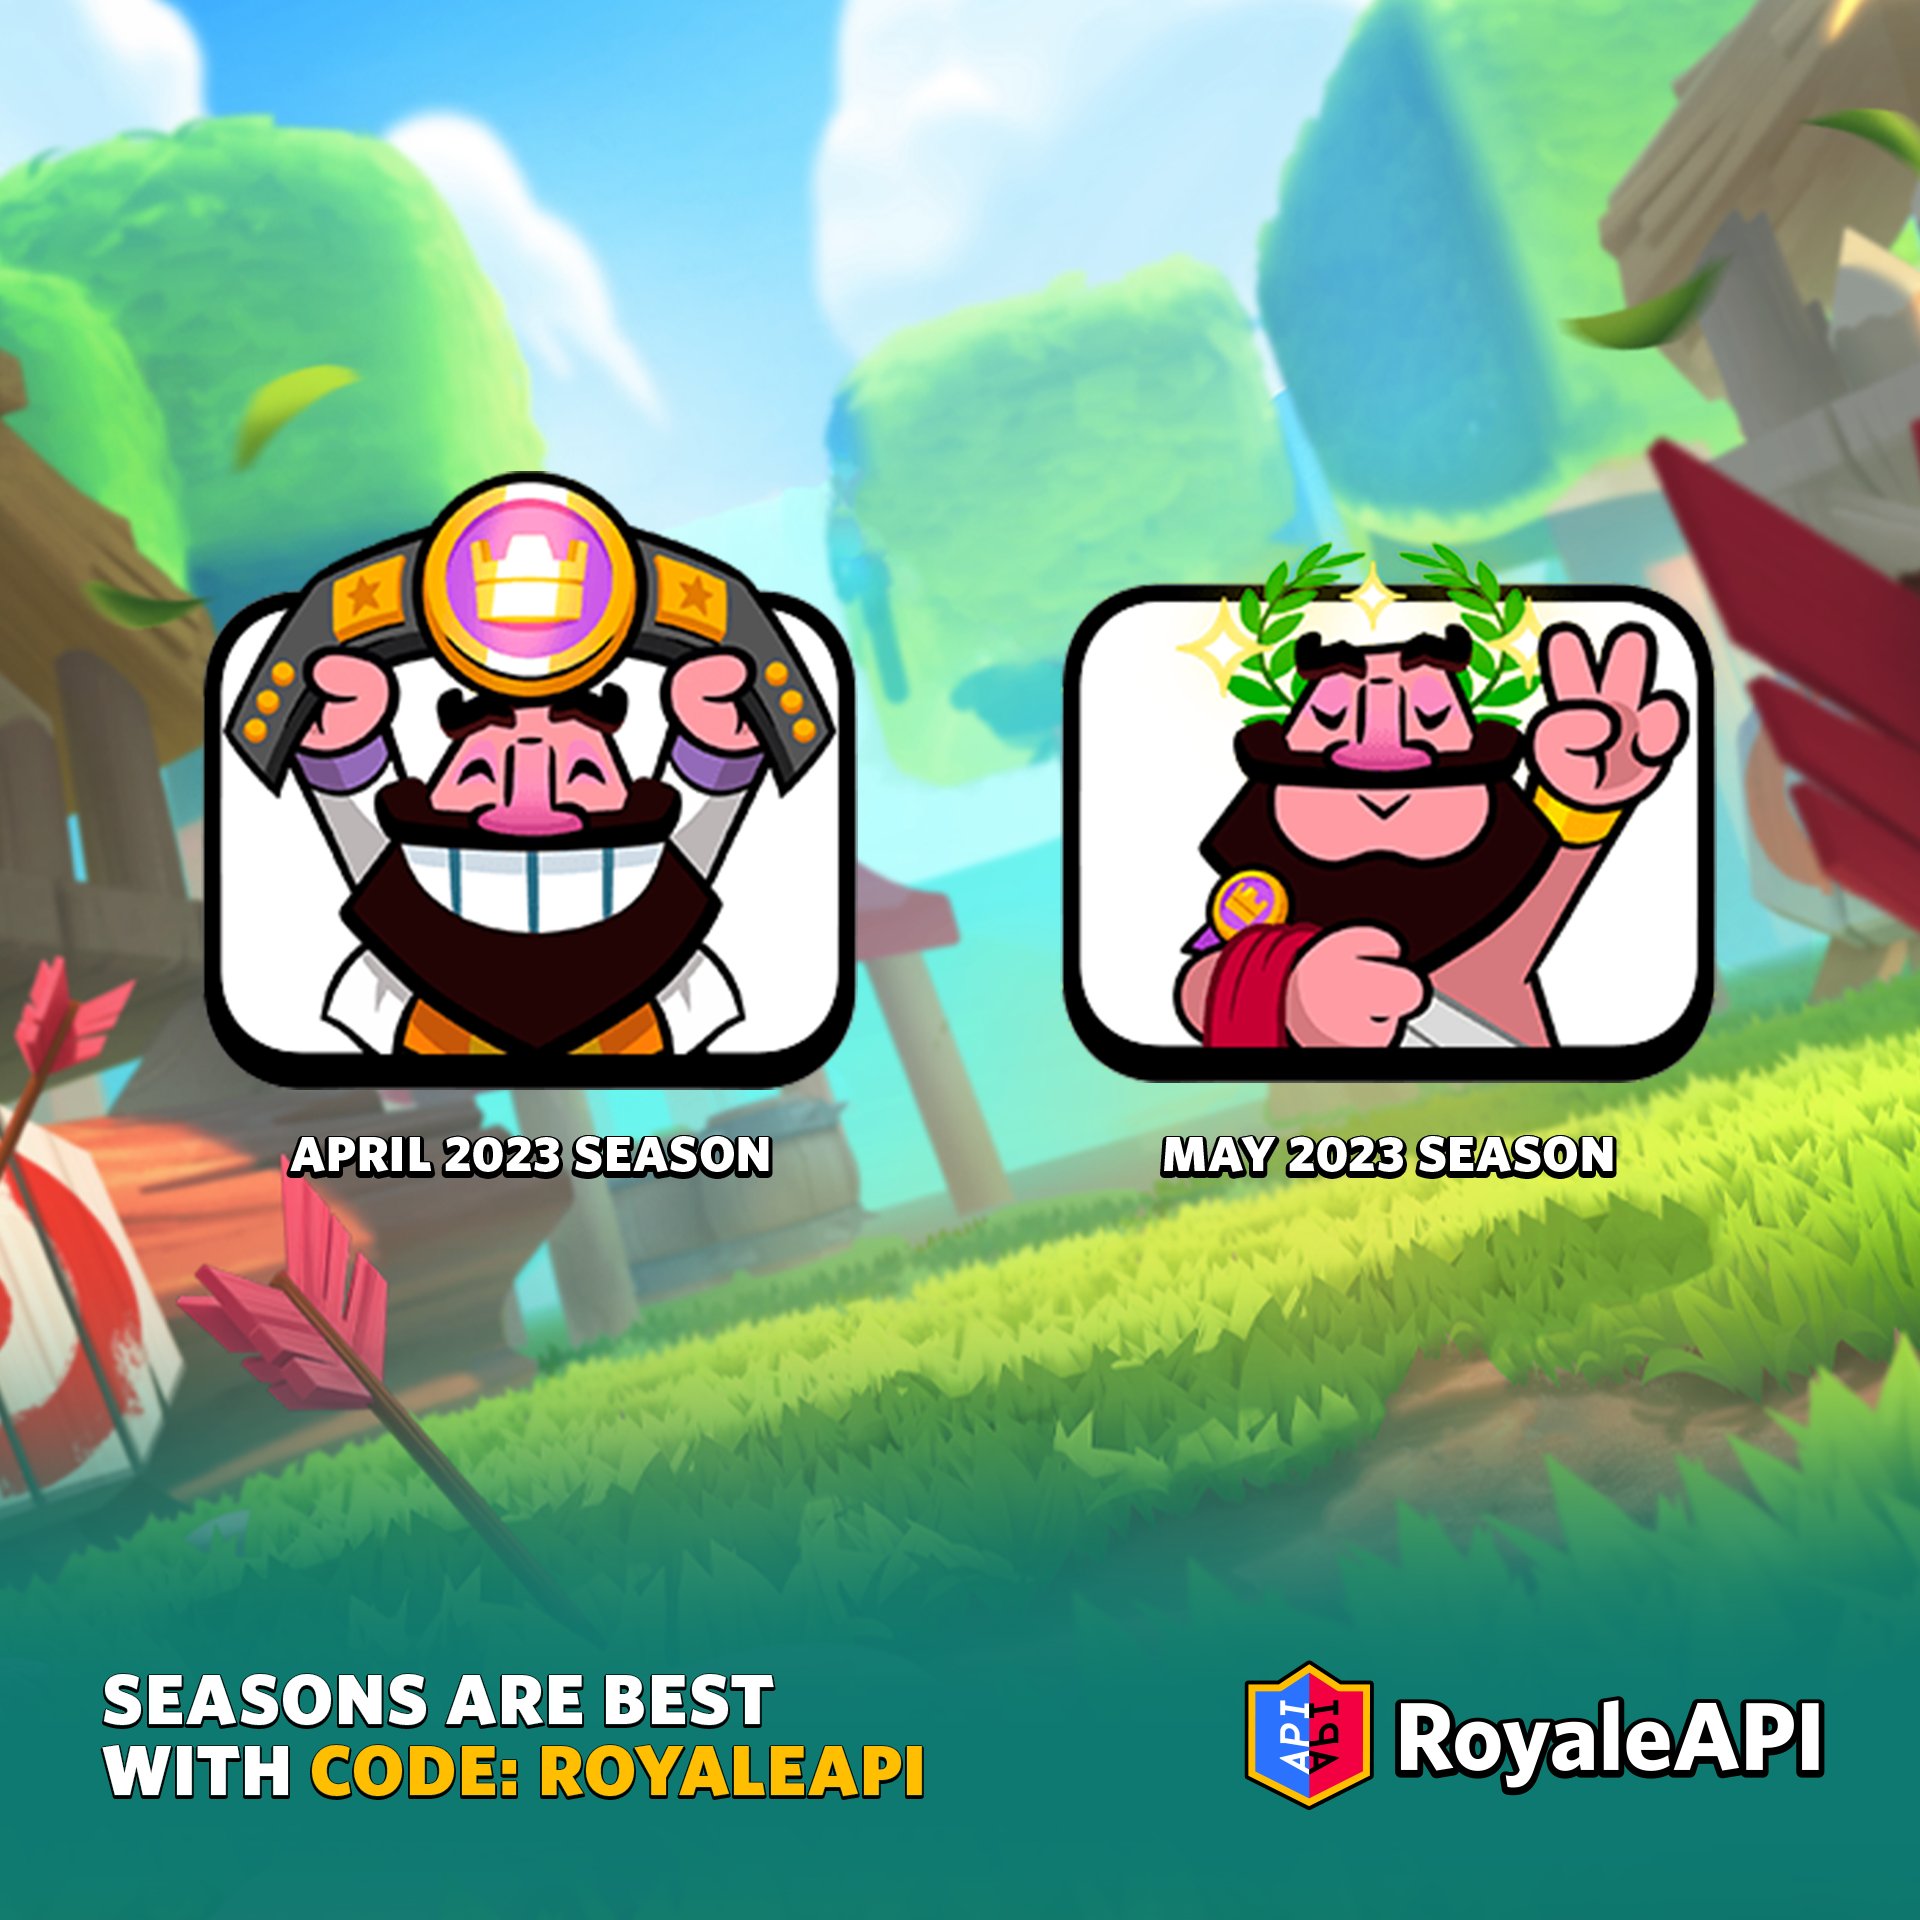 RoyaleAPI on X: 🏆 These are the best decks for Ultimate Champion (League  10) so far. See the rest of the decks on our site! 👉   #ClashRoyale #クラロワ  / X